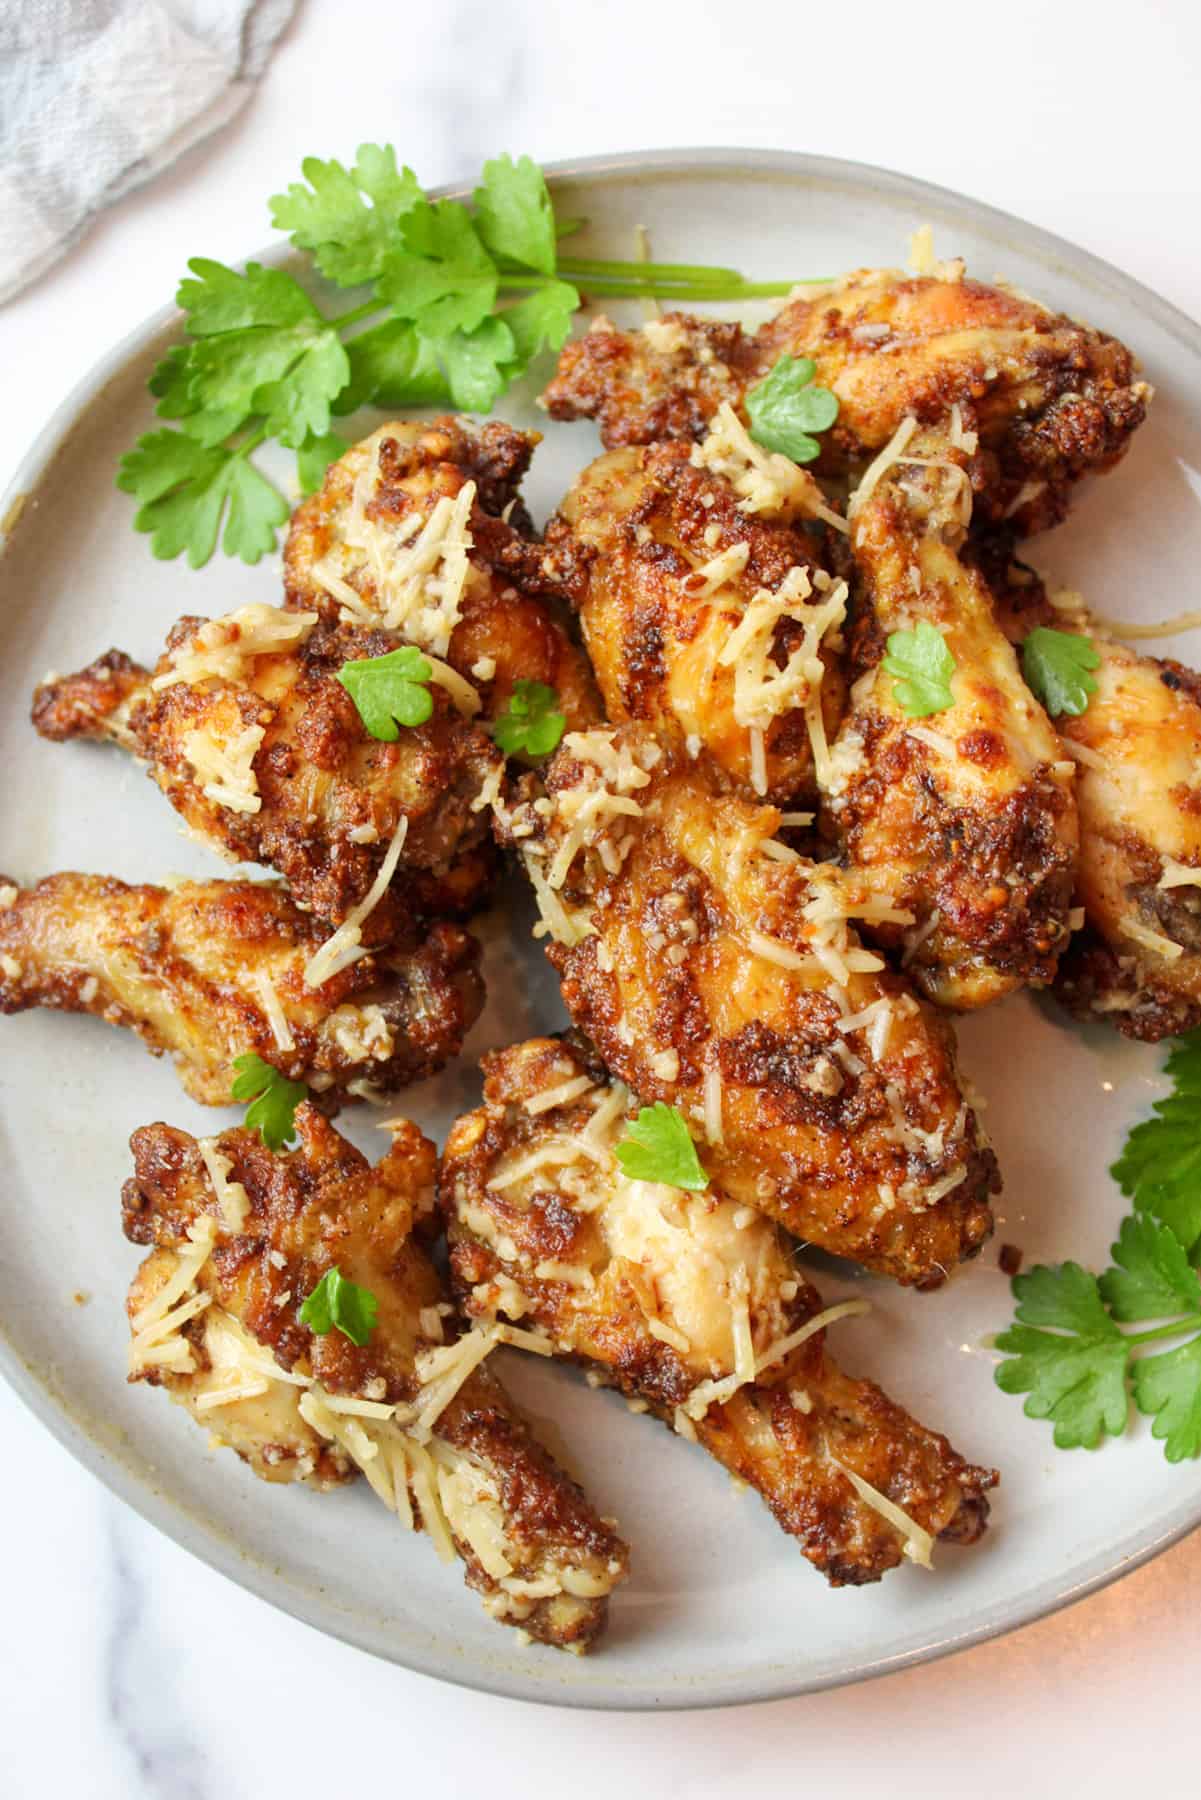 garlic parmesan chicken wings on a plate with green herb garnish